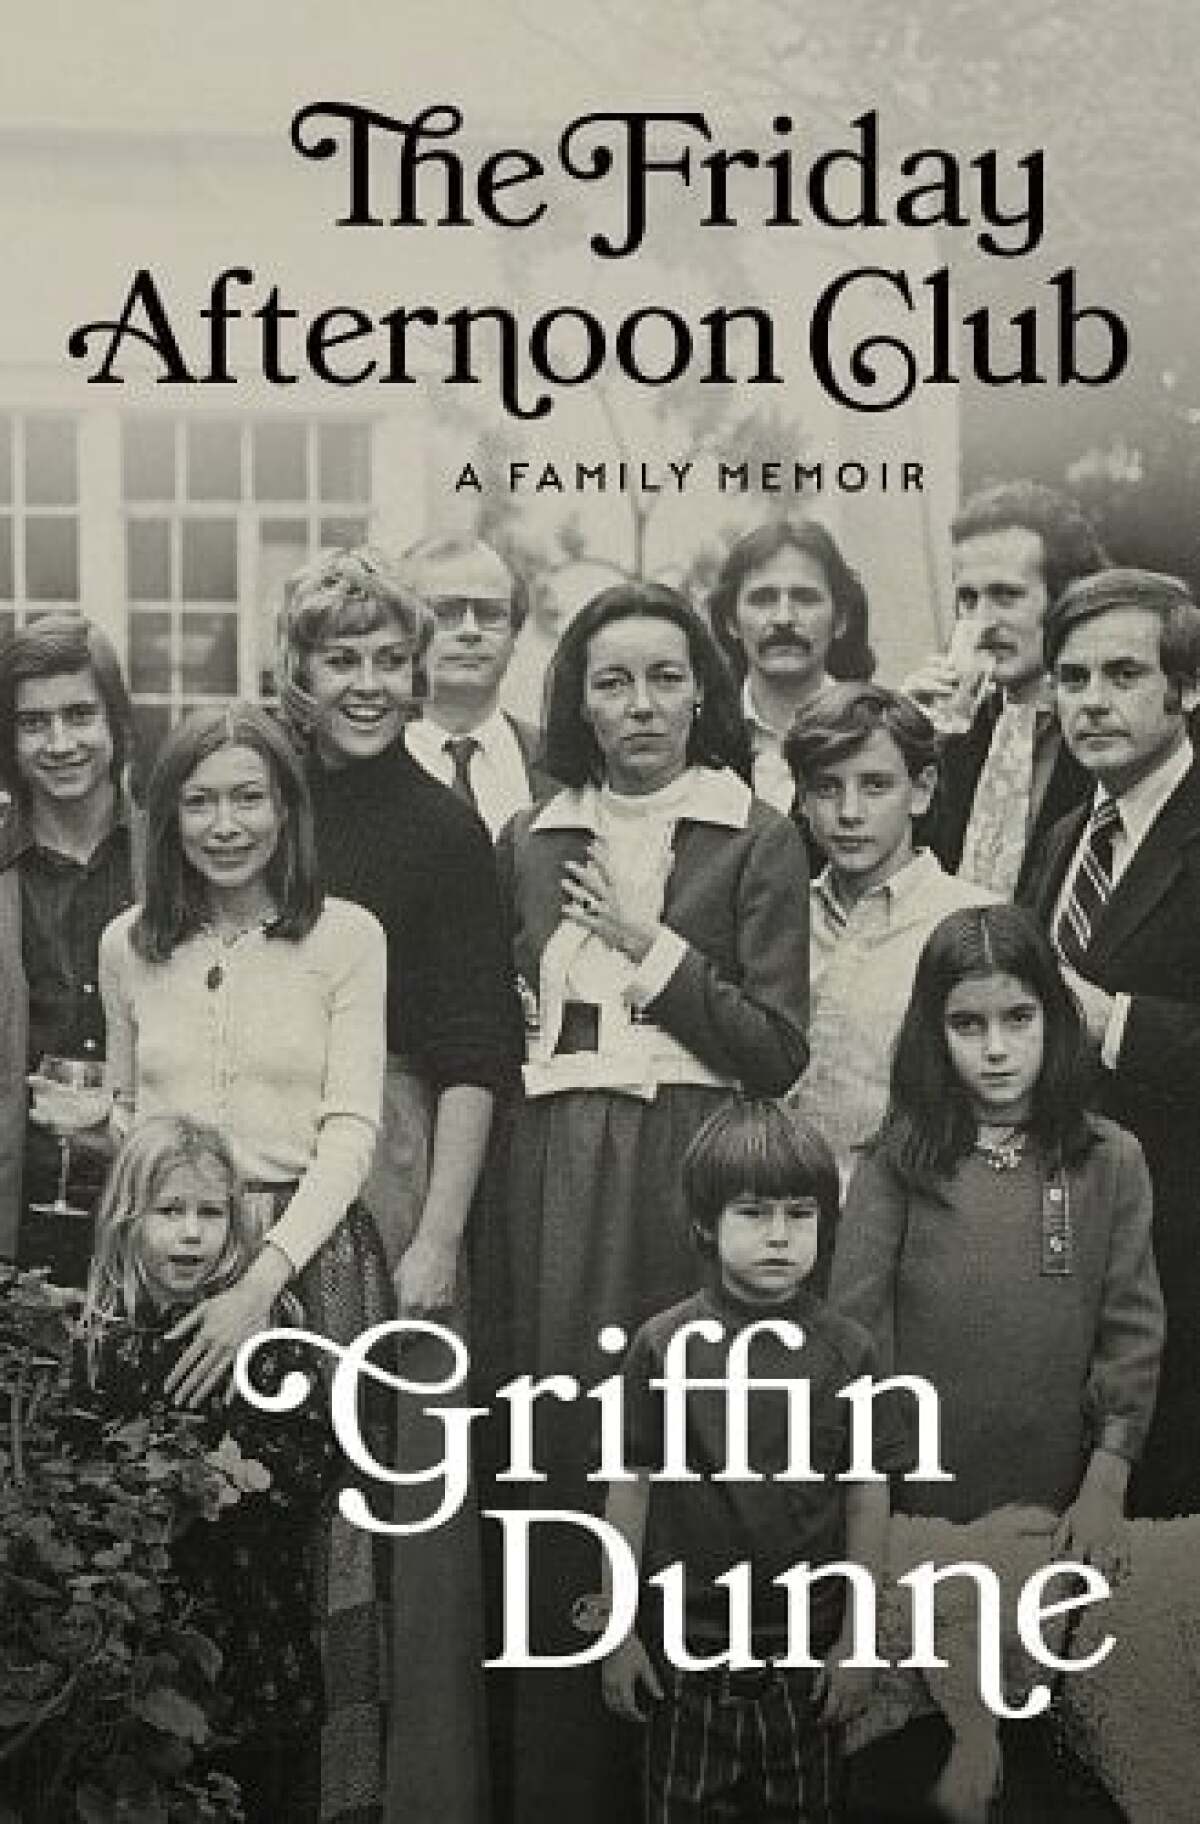 Cover from "The Friday Afternoon Club"